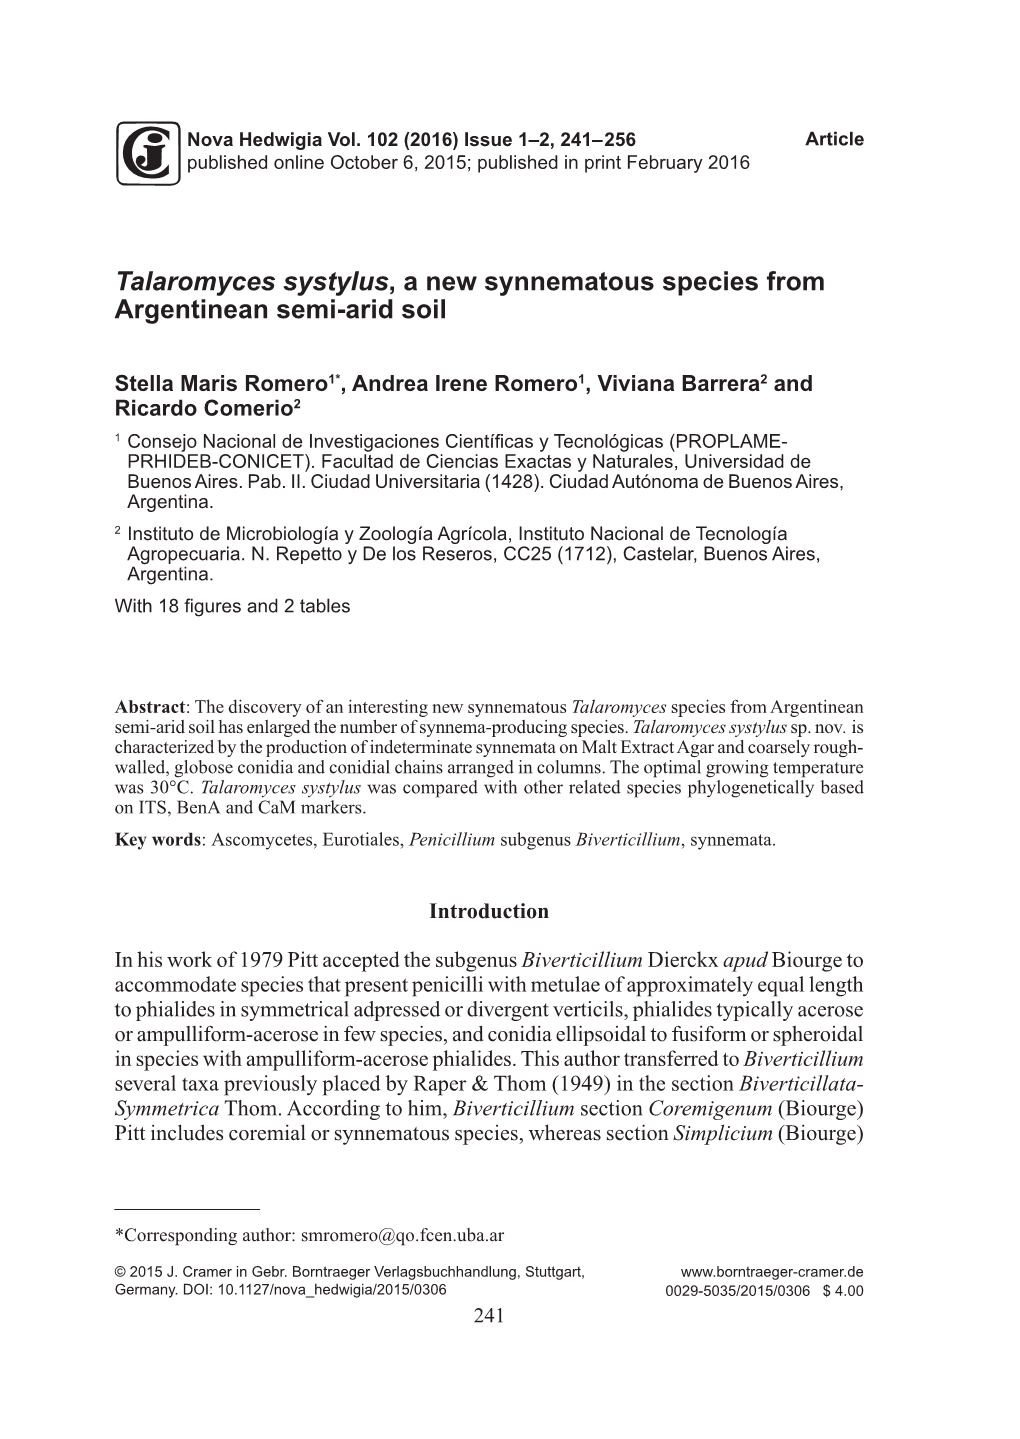 Talaromyces Systylus, a New Synnematous Species from Argentinean Semi-Arid Soil